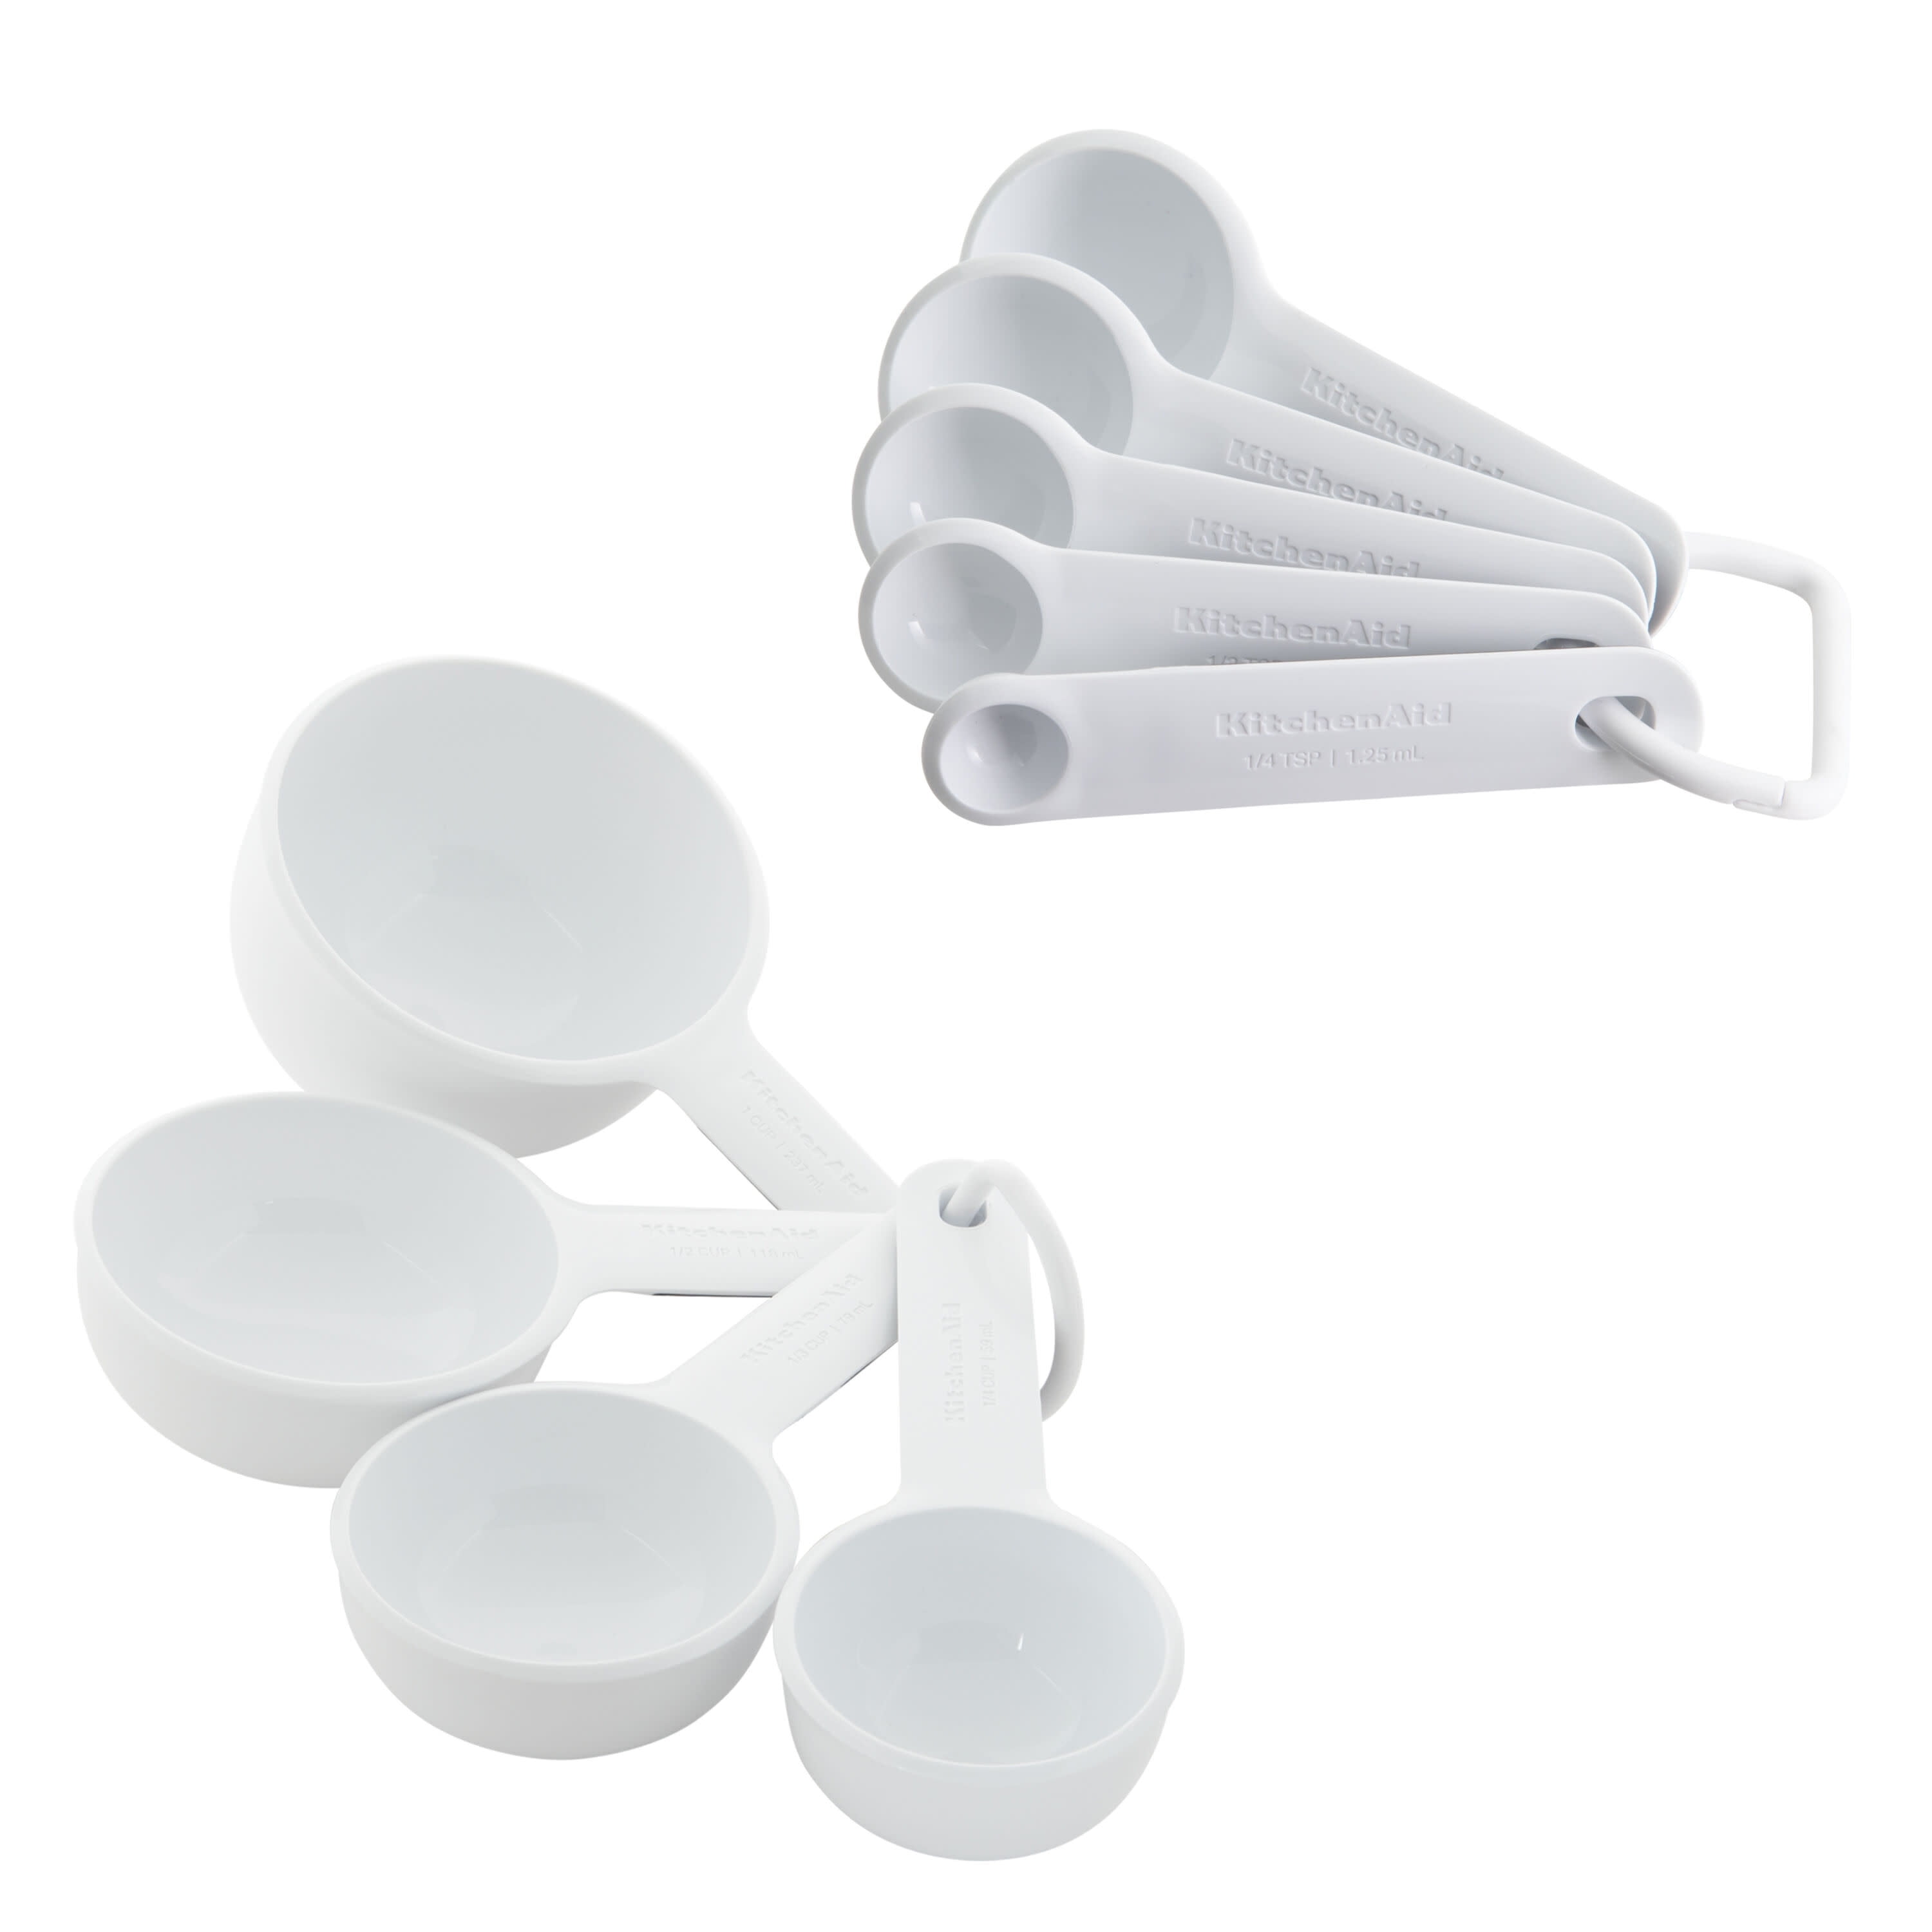 KitchenAid Cook for the Cure Measuring Cups and Spoons Set Reviews –